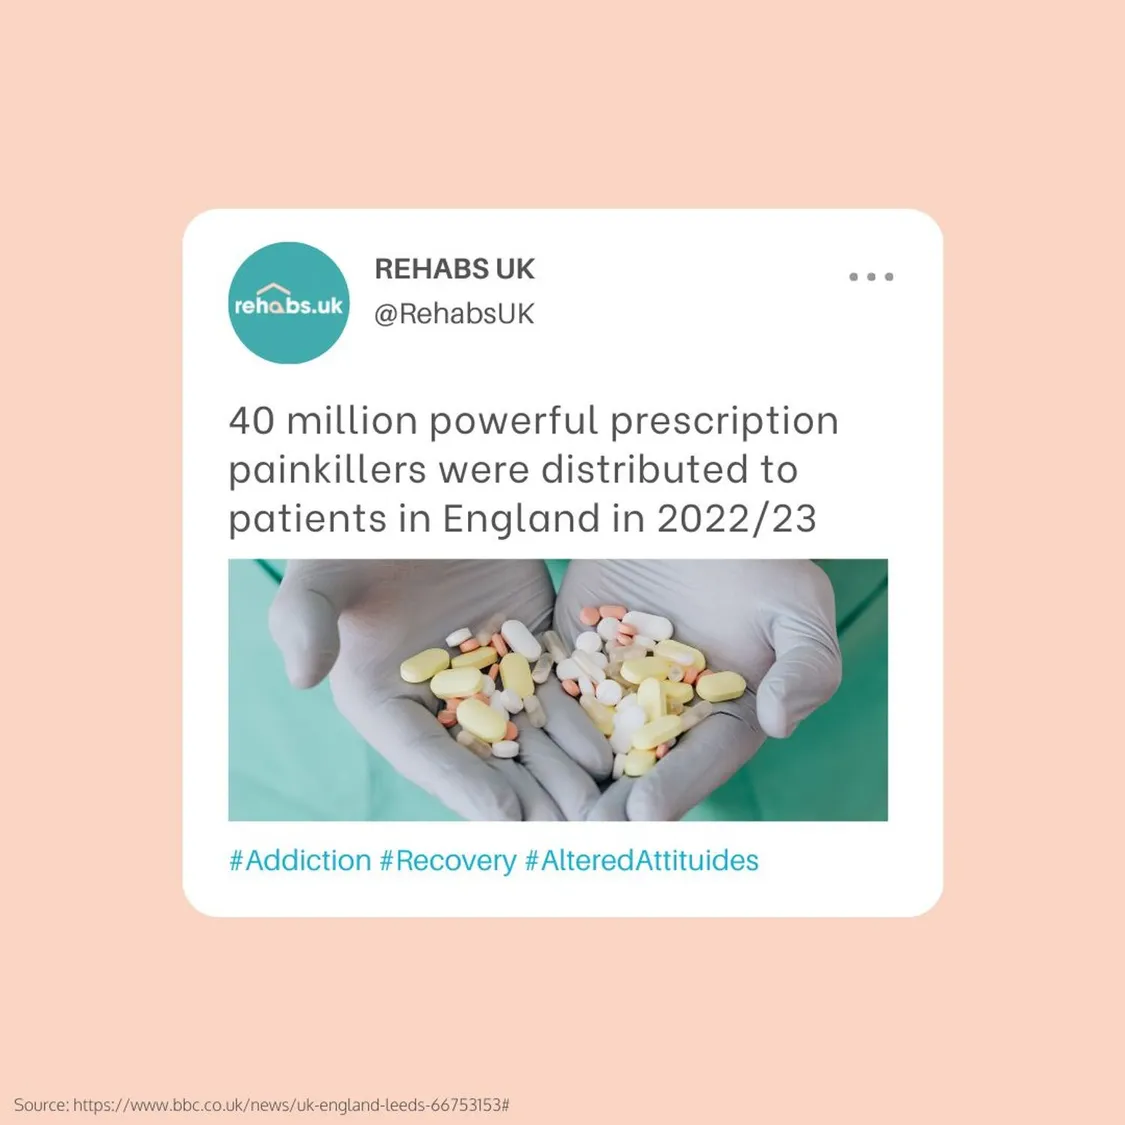 Infographic showing that 40 million powerful prescription painkillers were distributed to patients in England in 2022/23